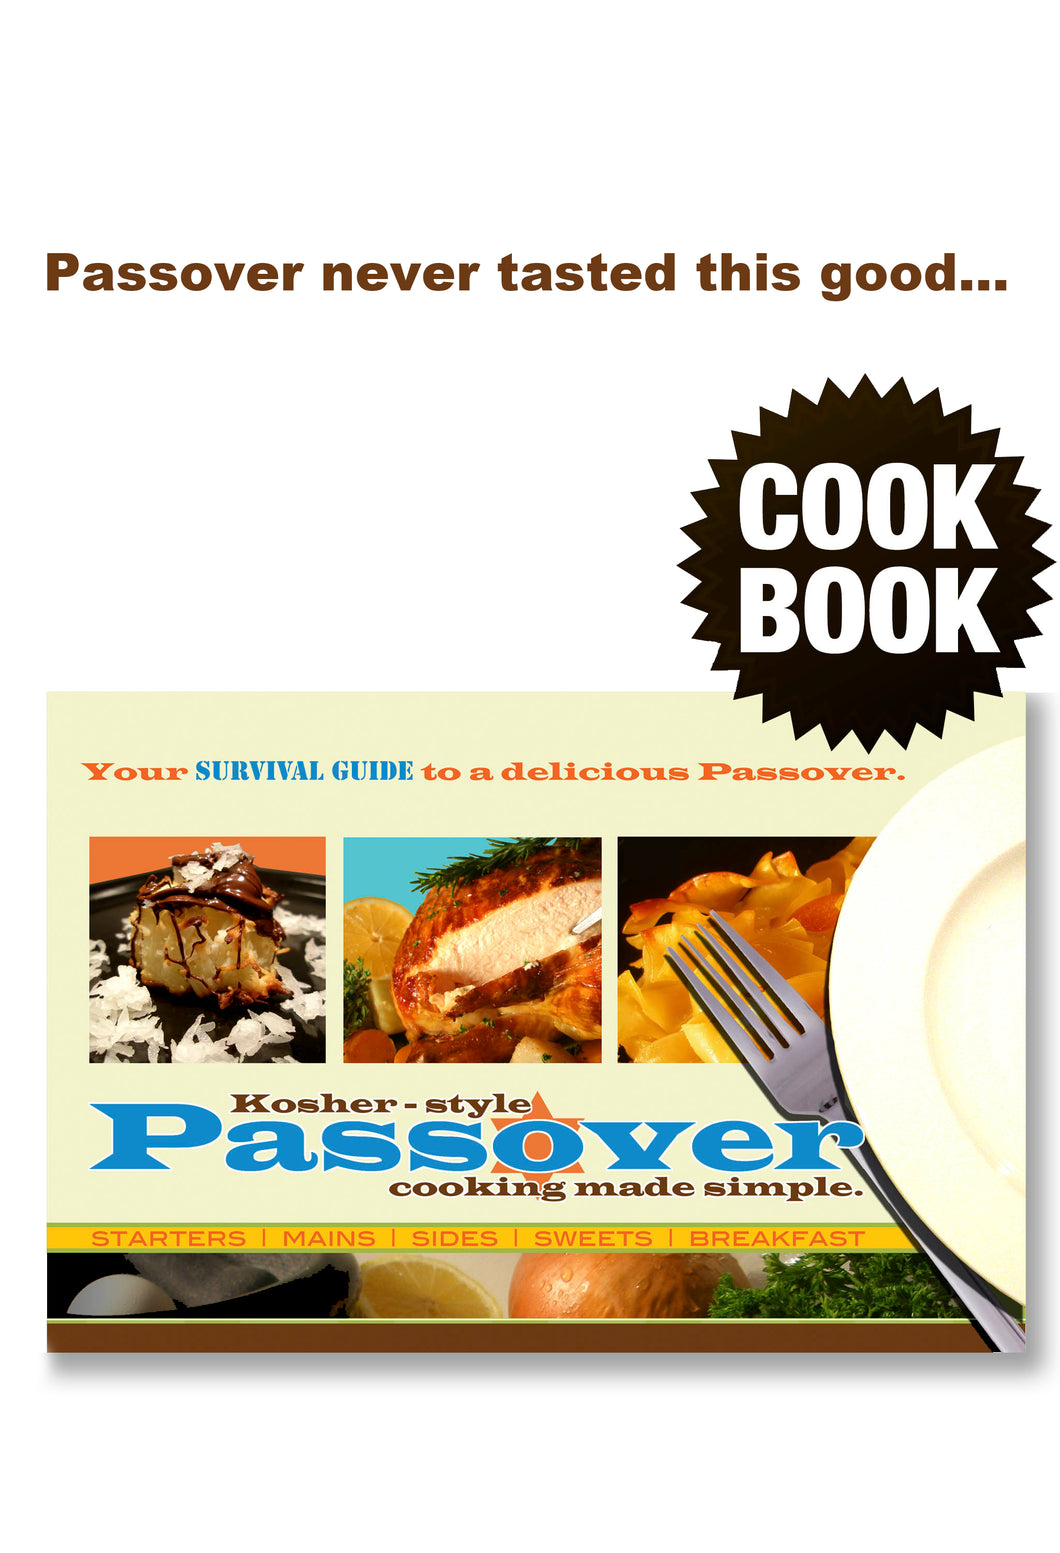 Kosher-style Passover Cooking Made Simple - Cookbook cover